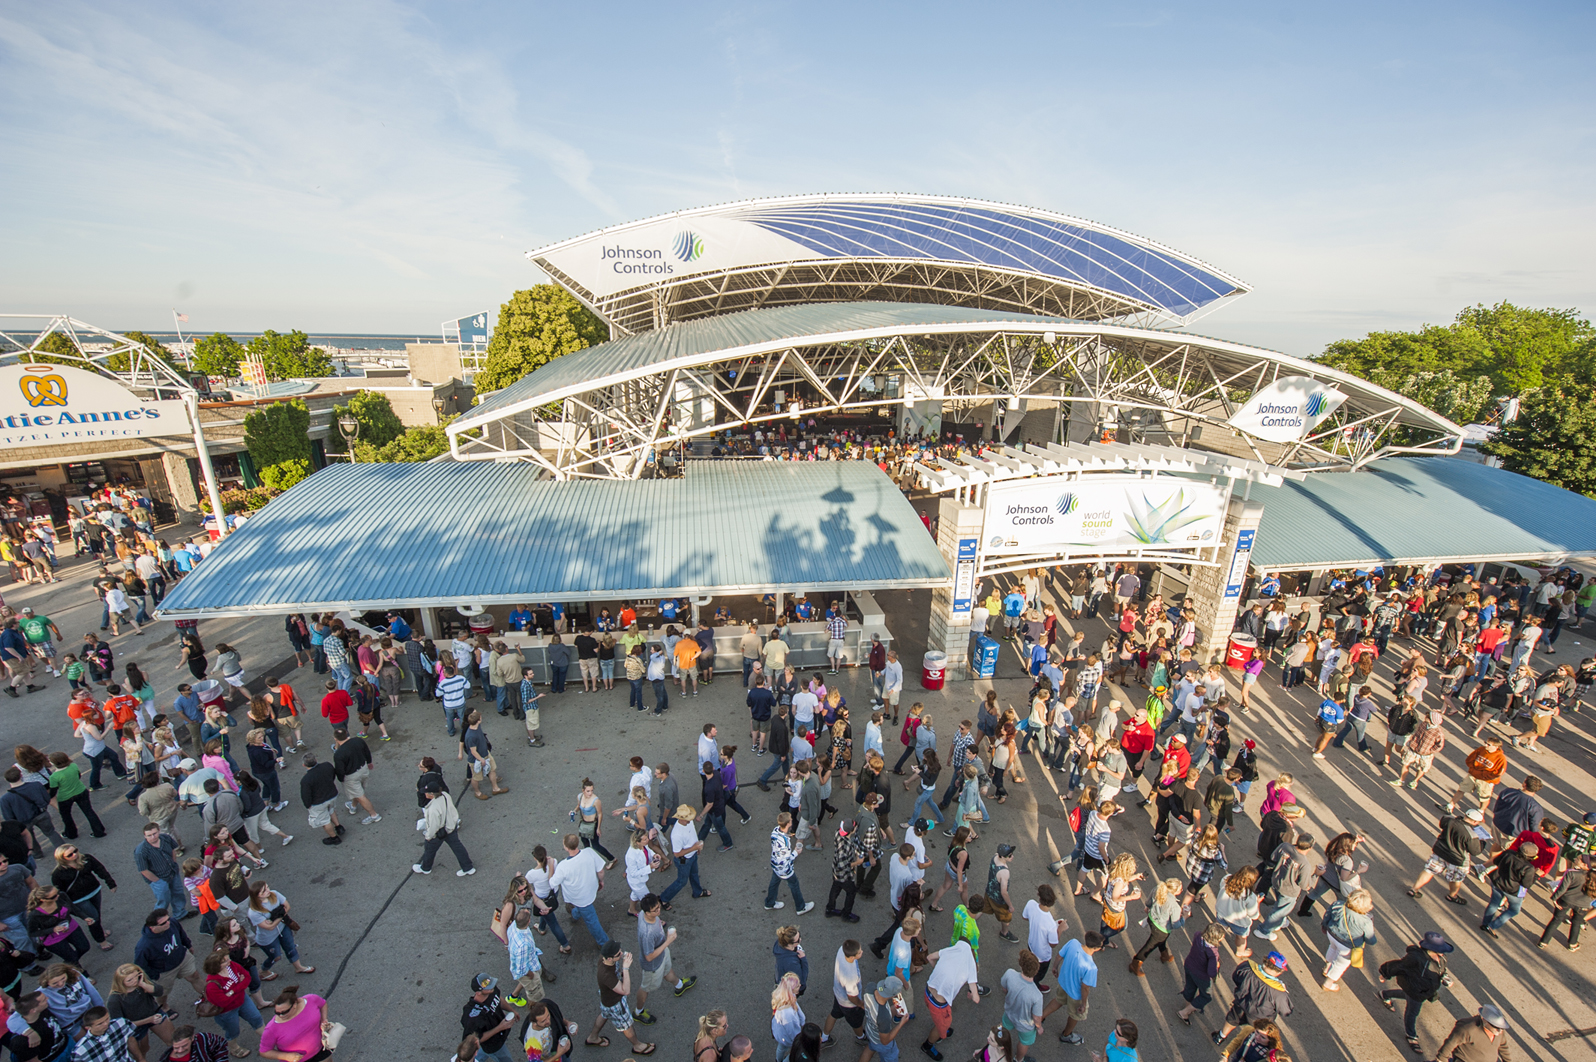 Summerfest Announces Johnson Controls World Sound Stage Headliners and